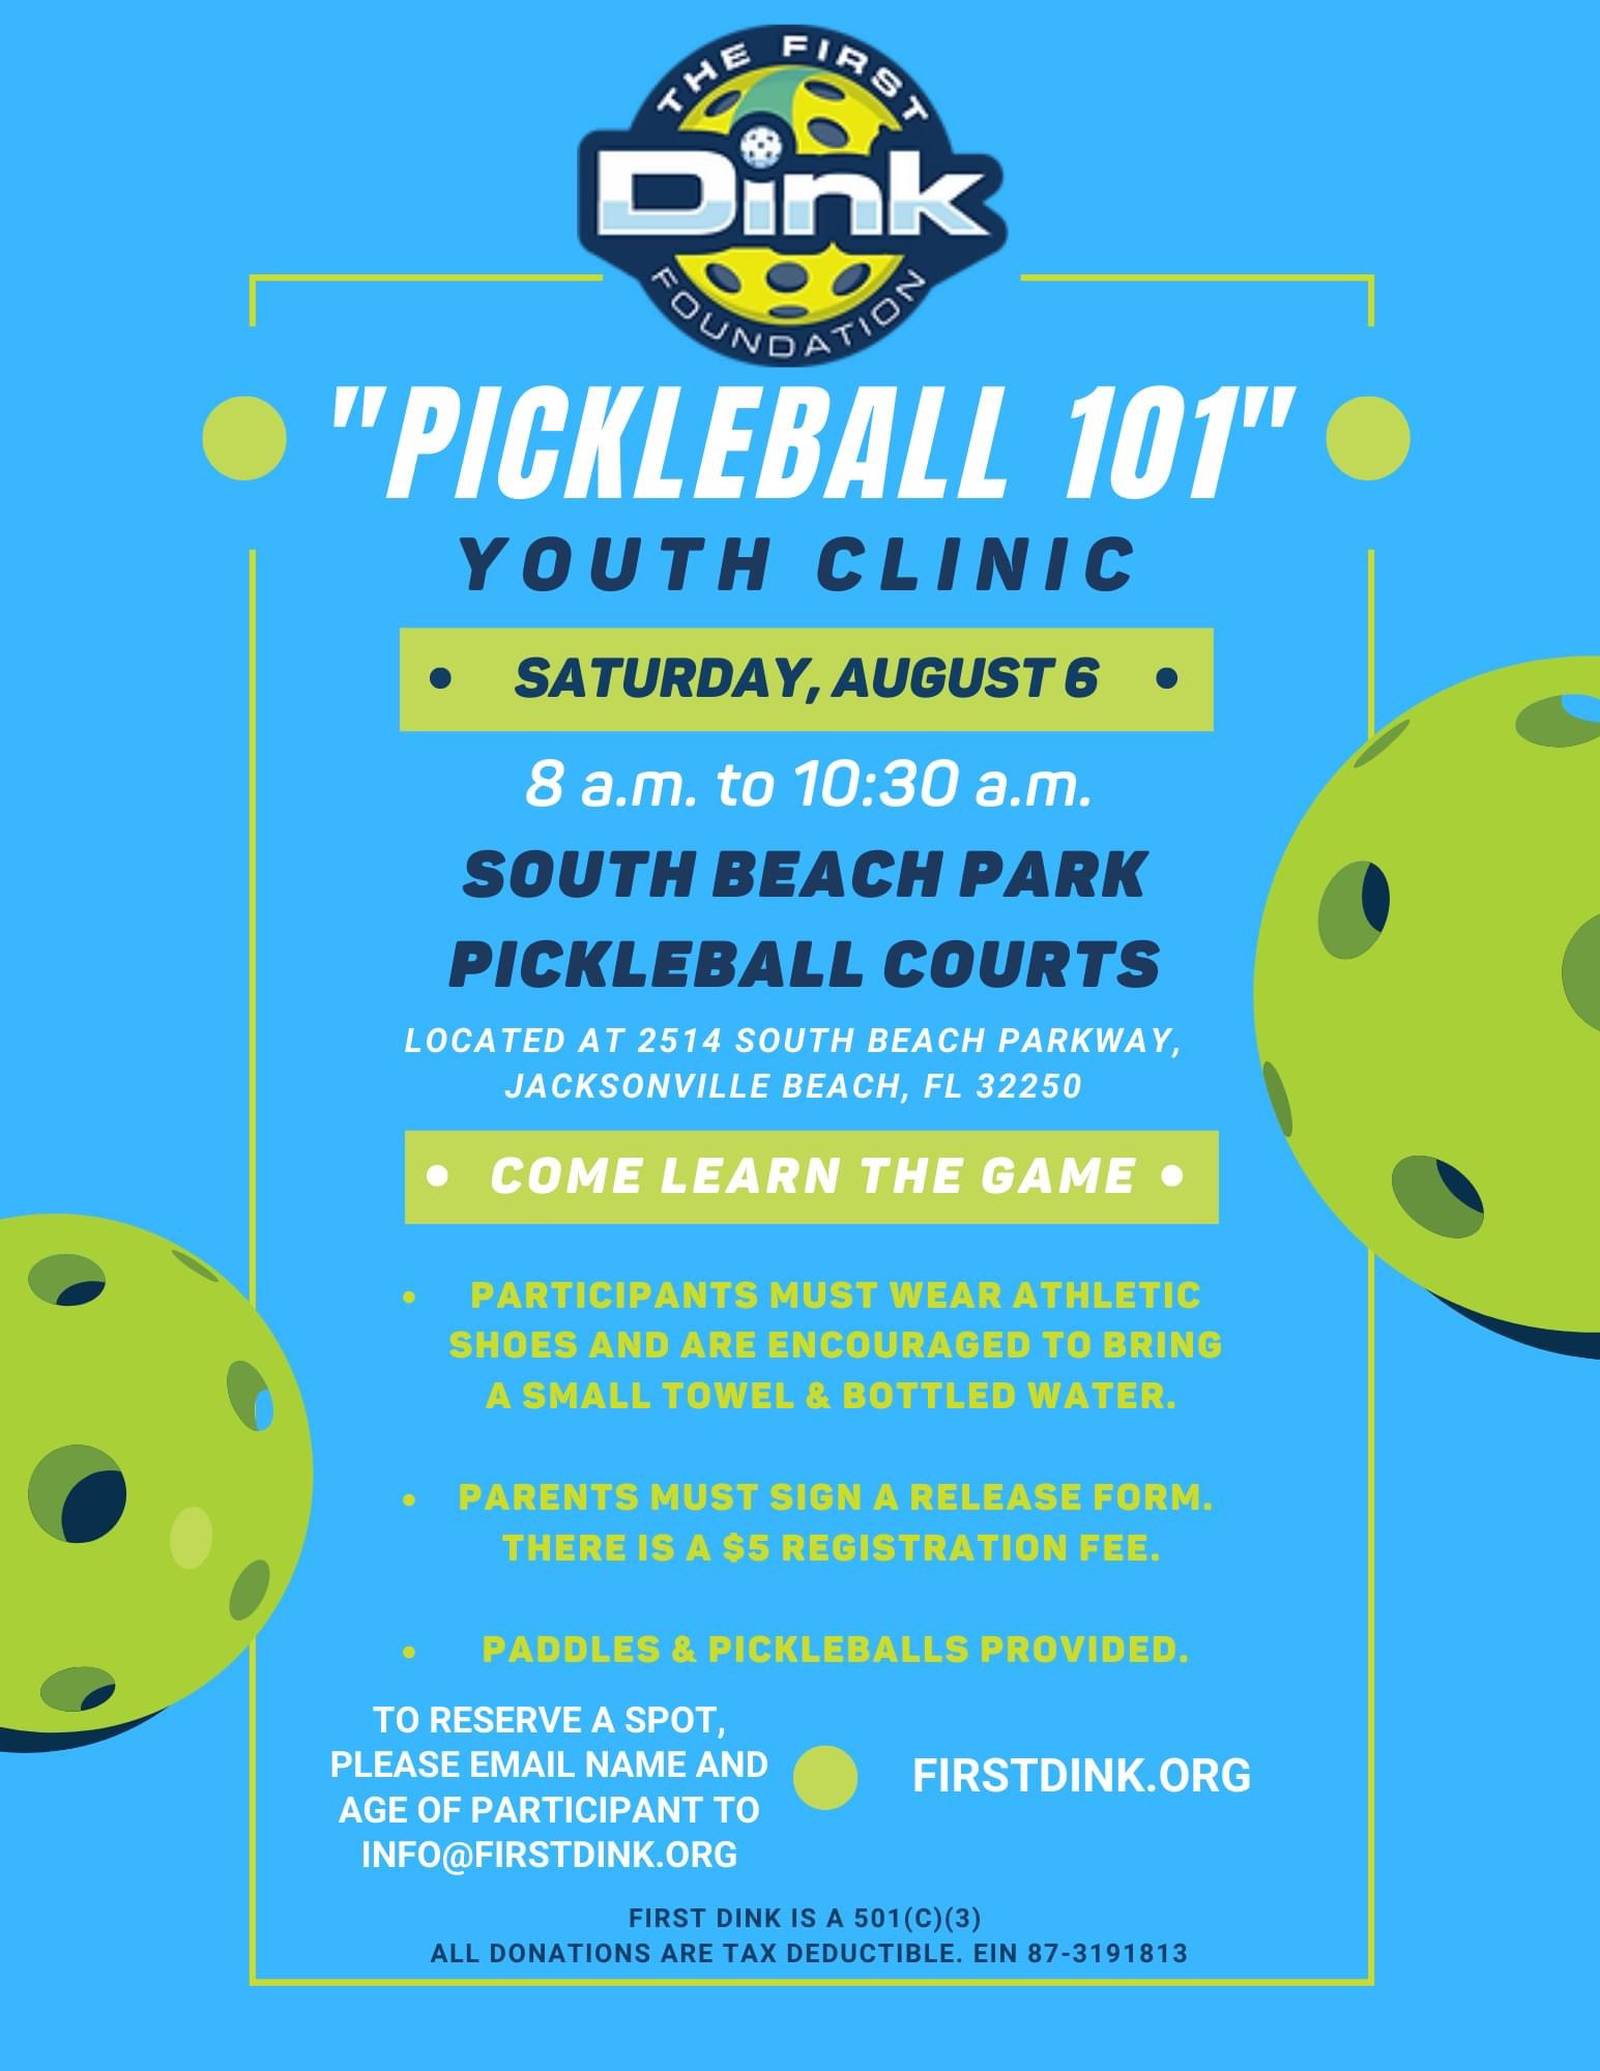 Nonprofit launches national Pickleball Day to make a difference in the